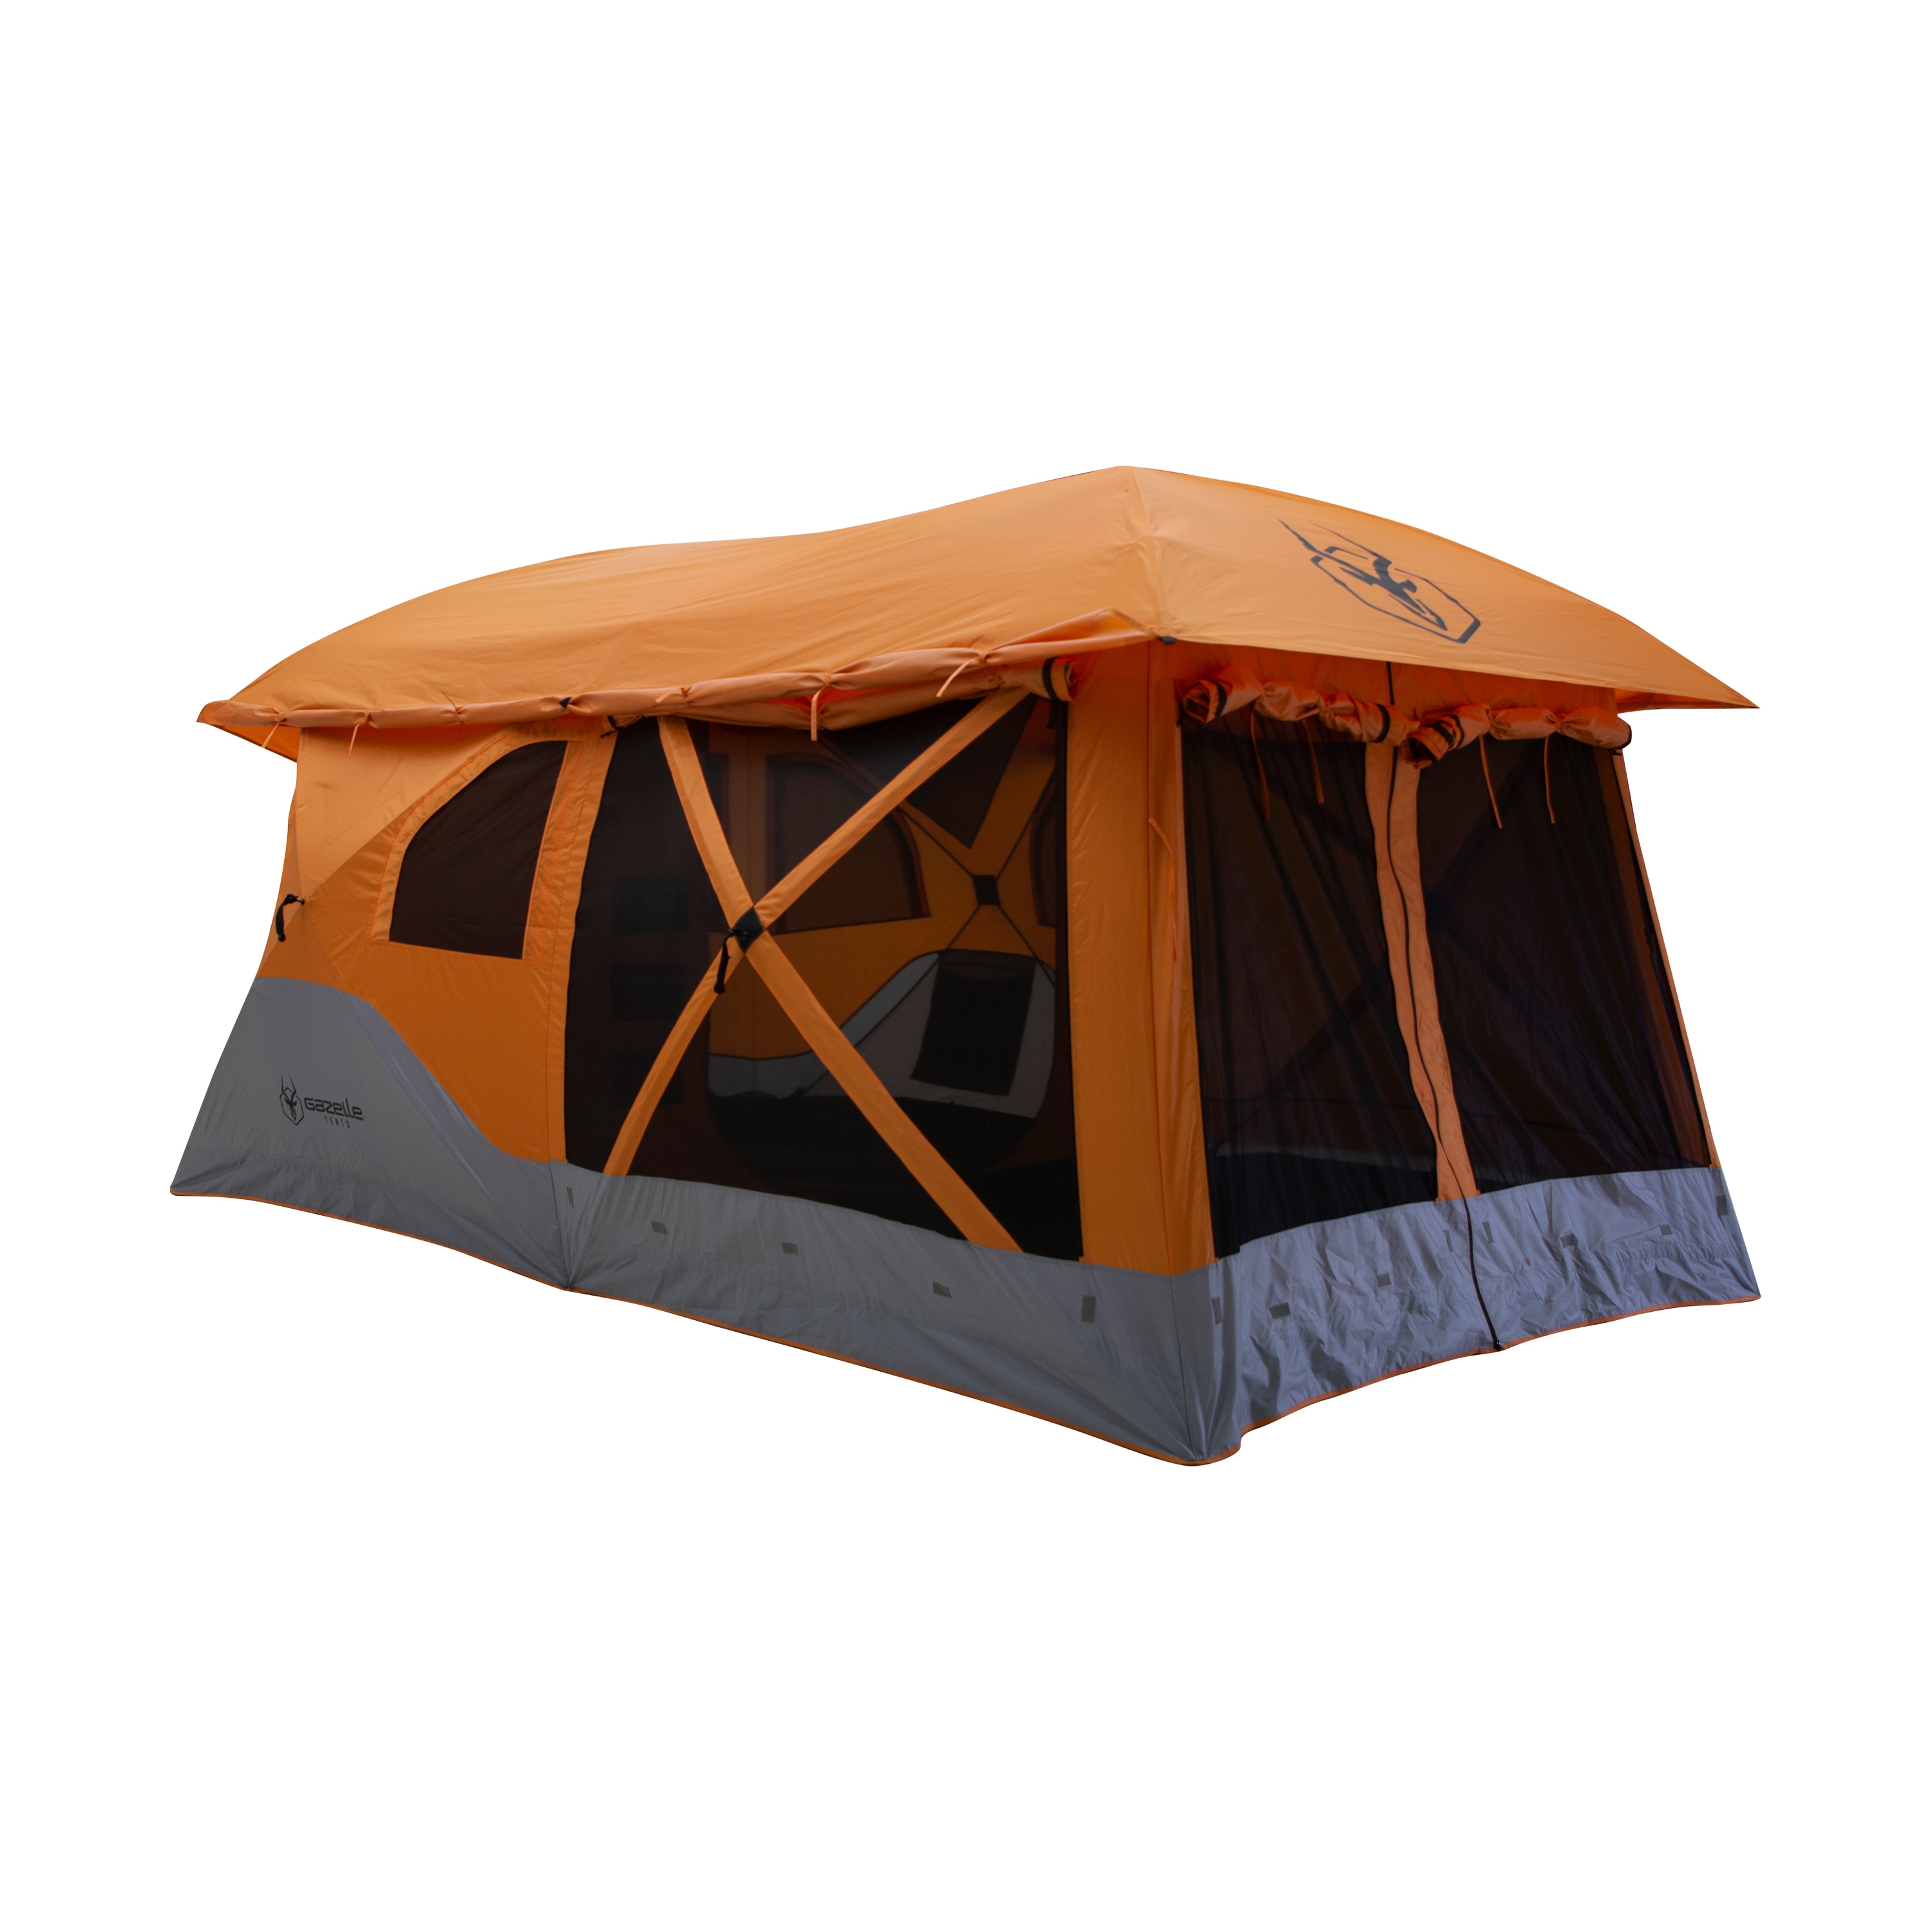 Gazelle Polyester 8-Person in the Tents department at